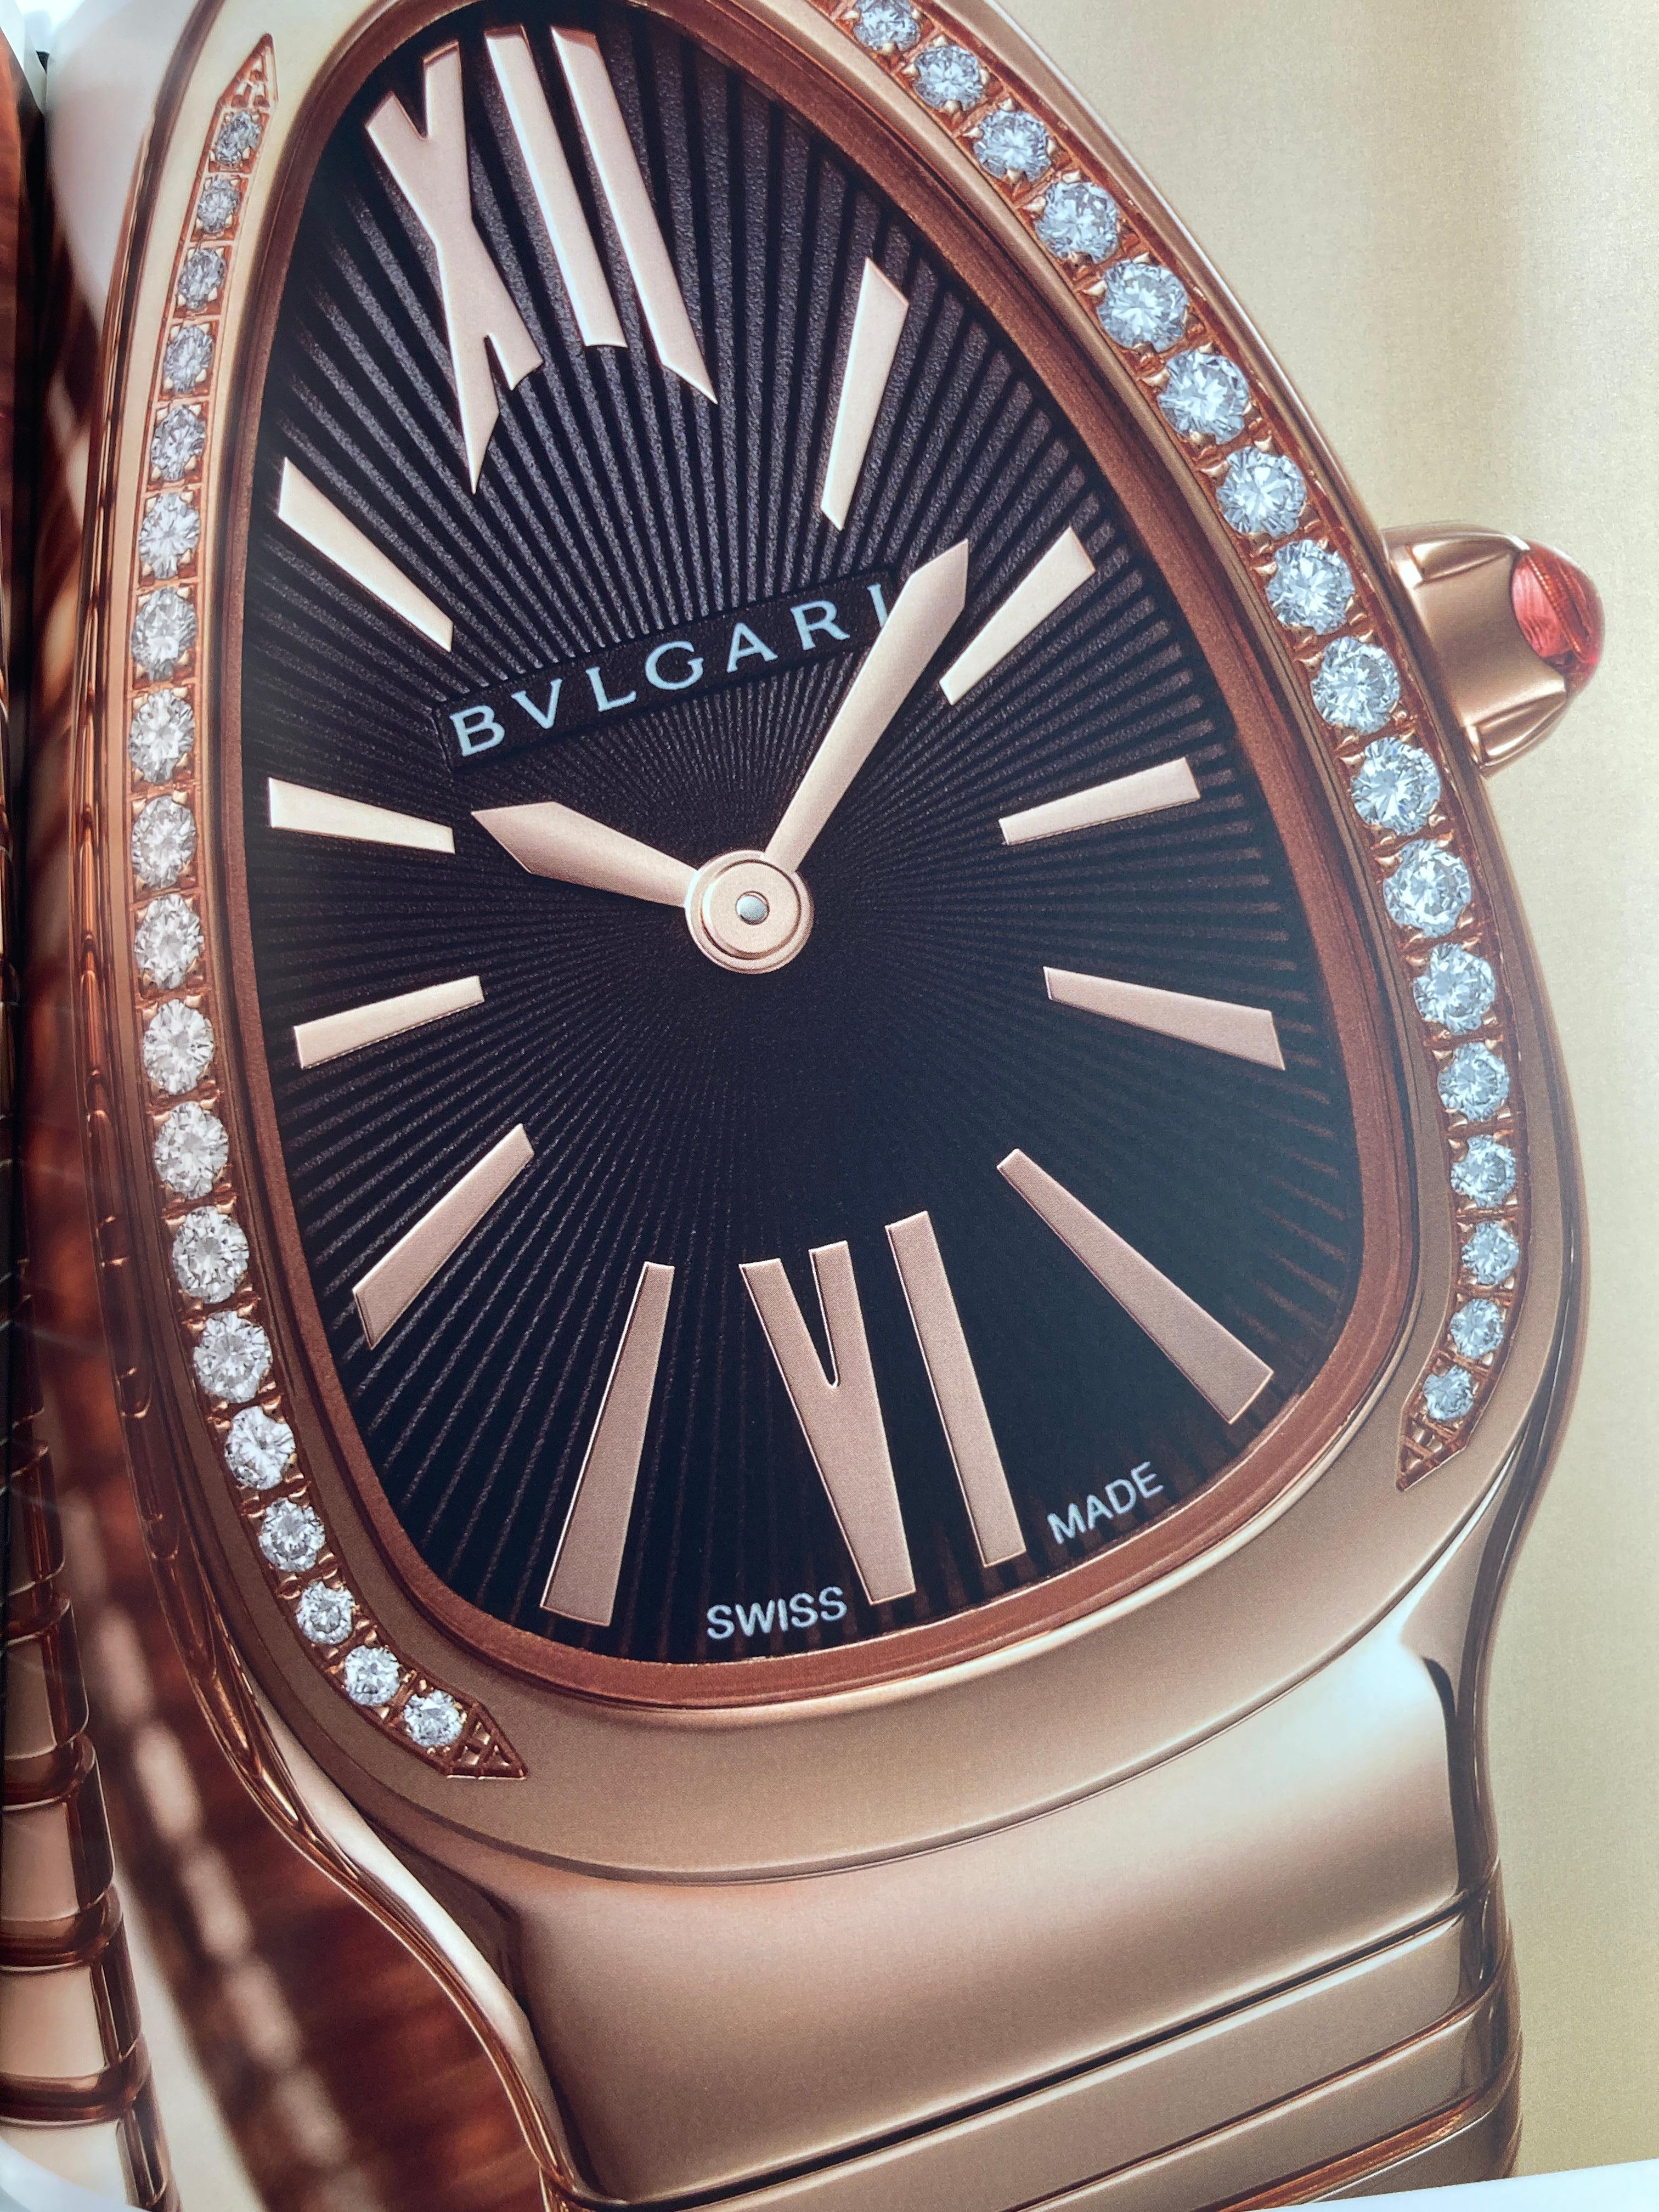 Set of Two Bvlgari Brand Book Catalogue Jewellery and Watches 2013 For Sale 12